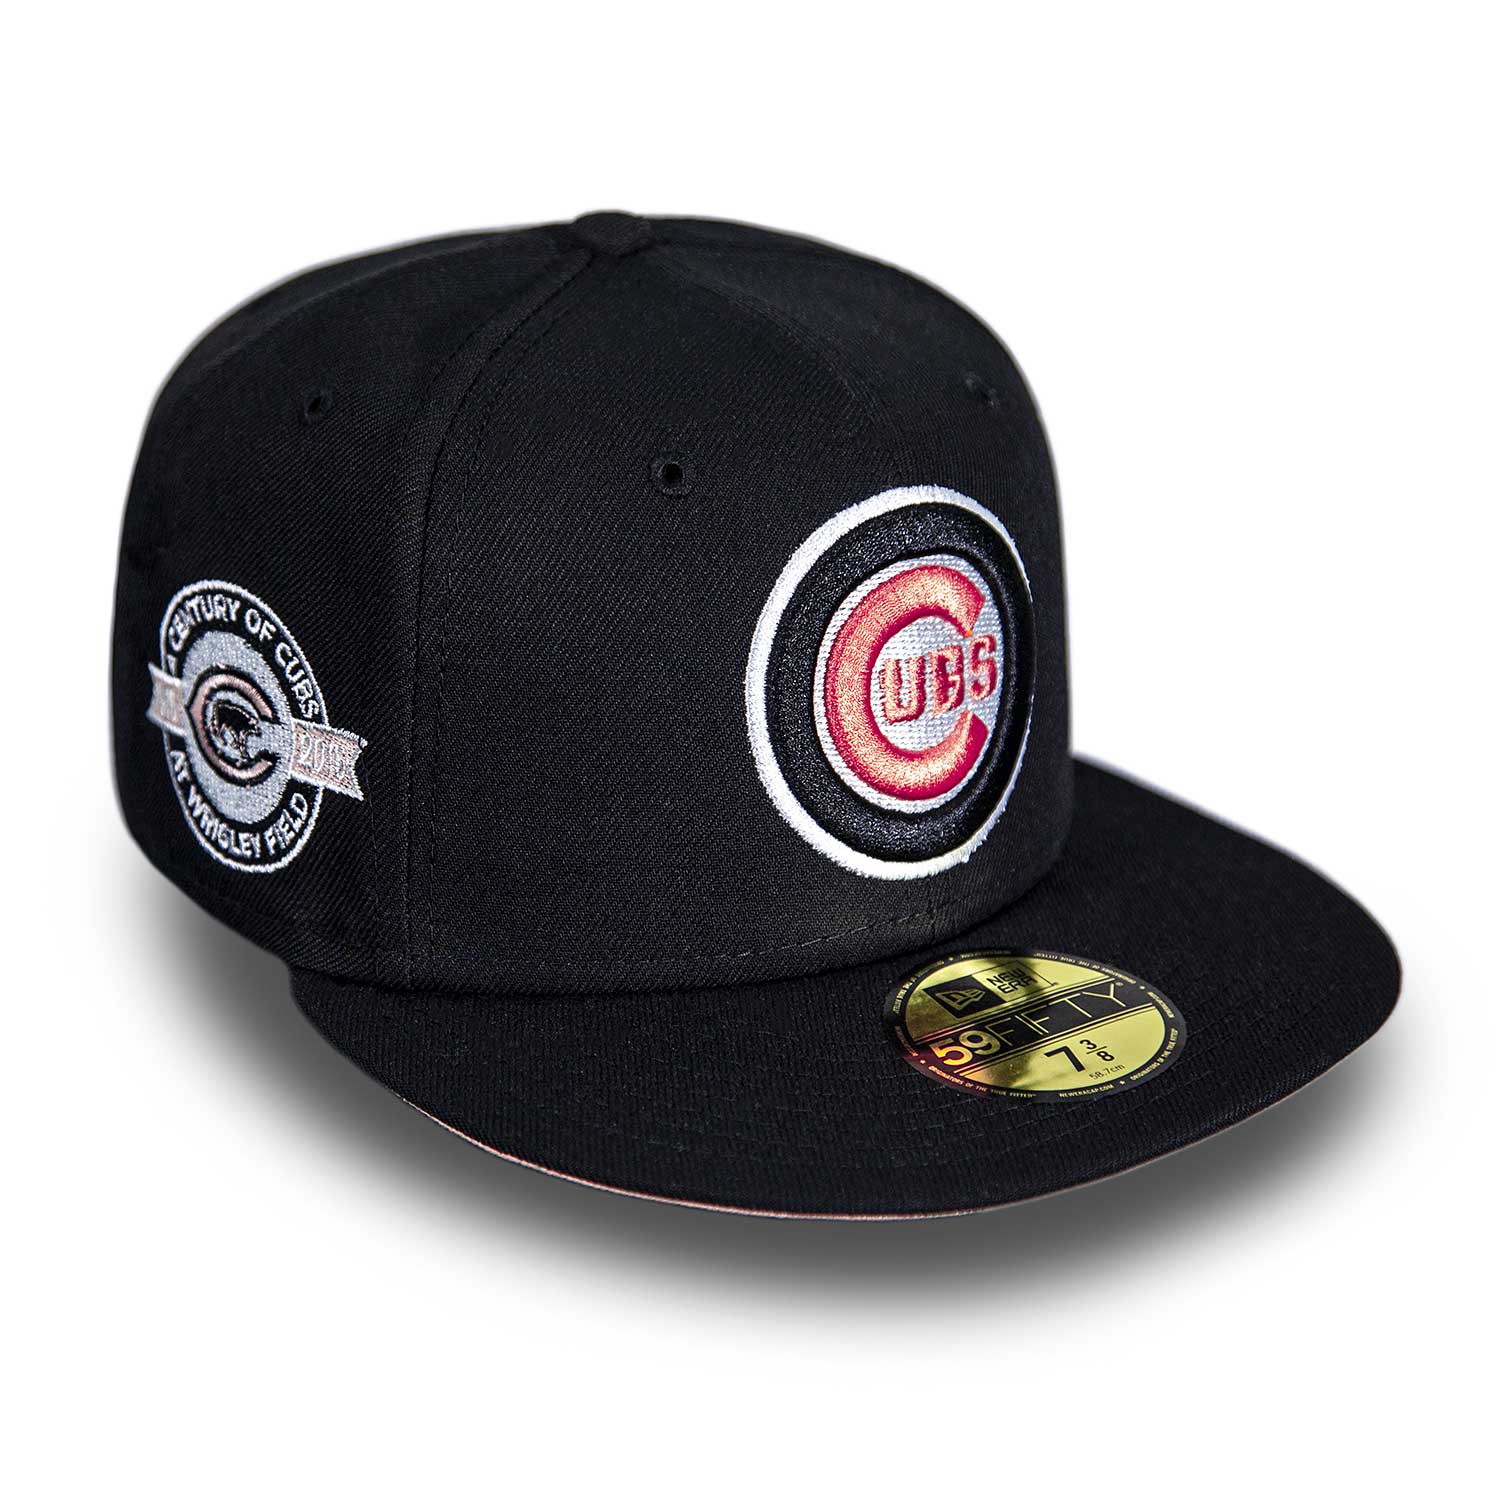 Chicago Cubs Black & Peach Bullseye 59FIFTY Fitted Cap 7 1/2 = 23 1/2 in = 59.7 cm